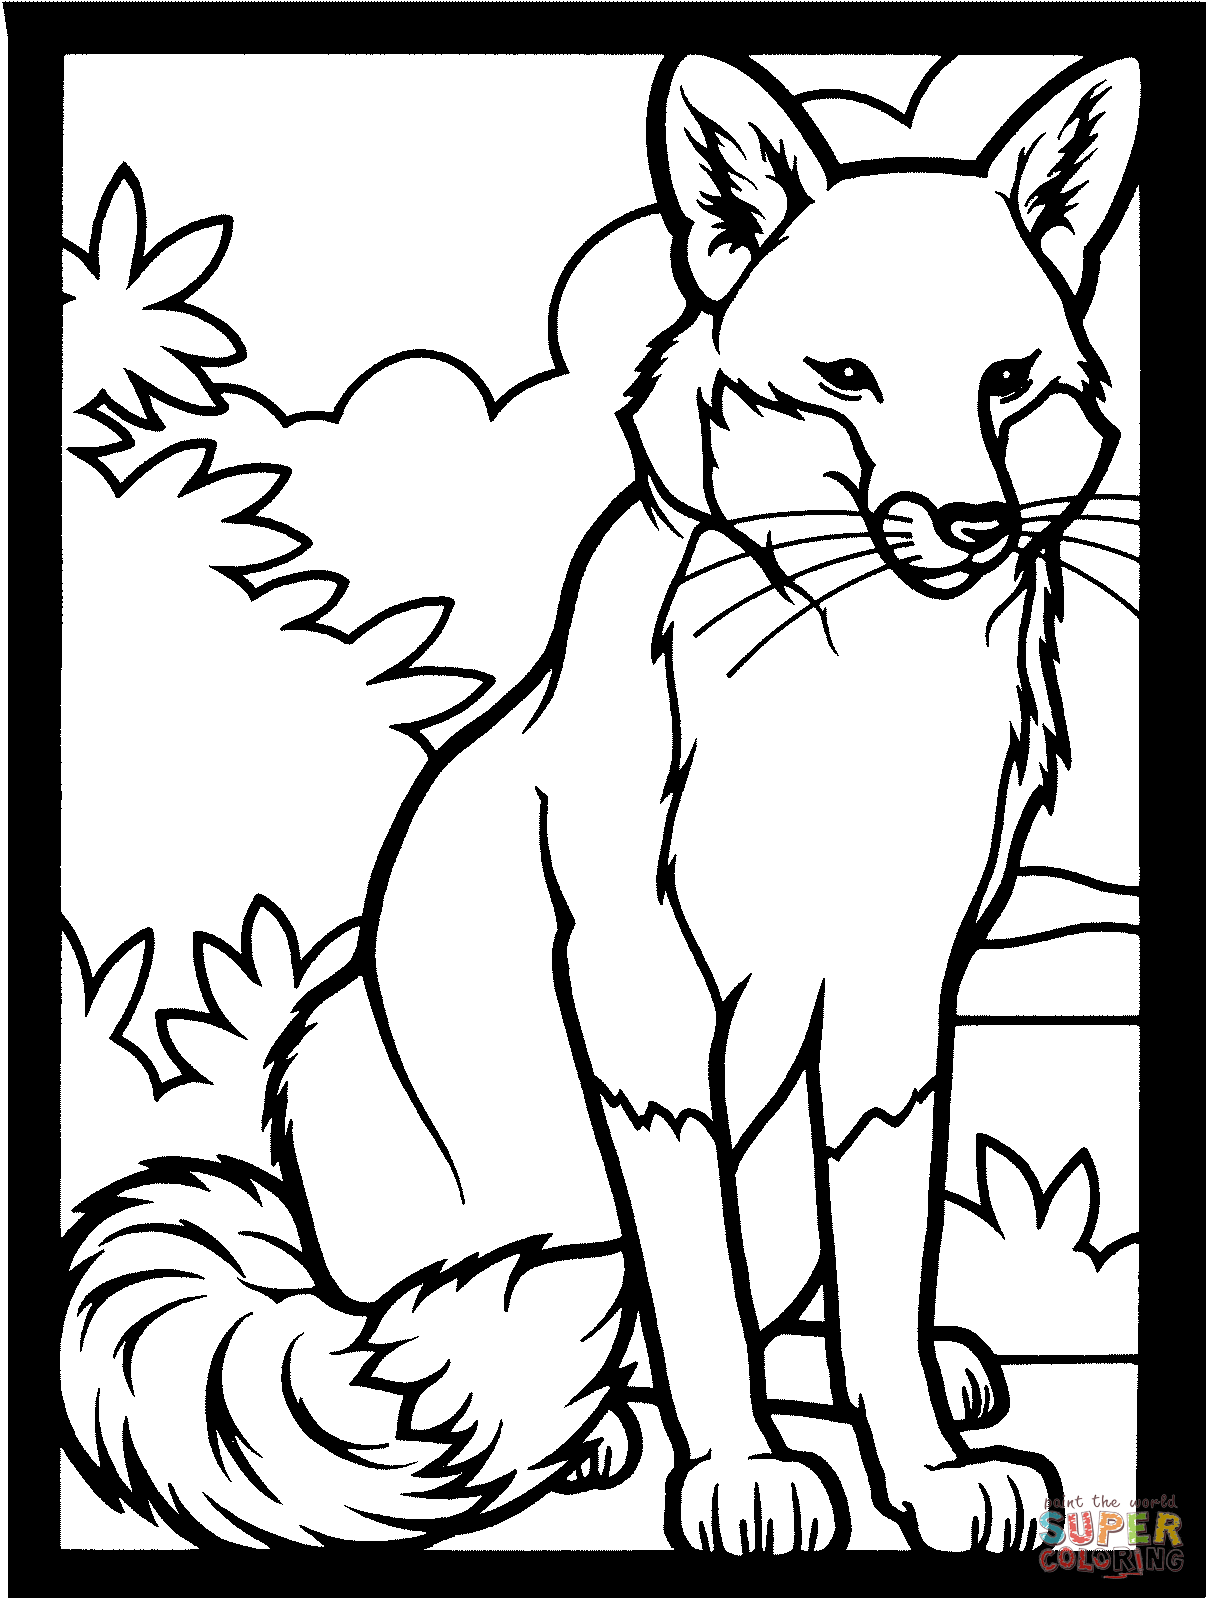 Red Fox coloring pages | Free Coloring Pages